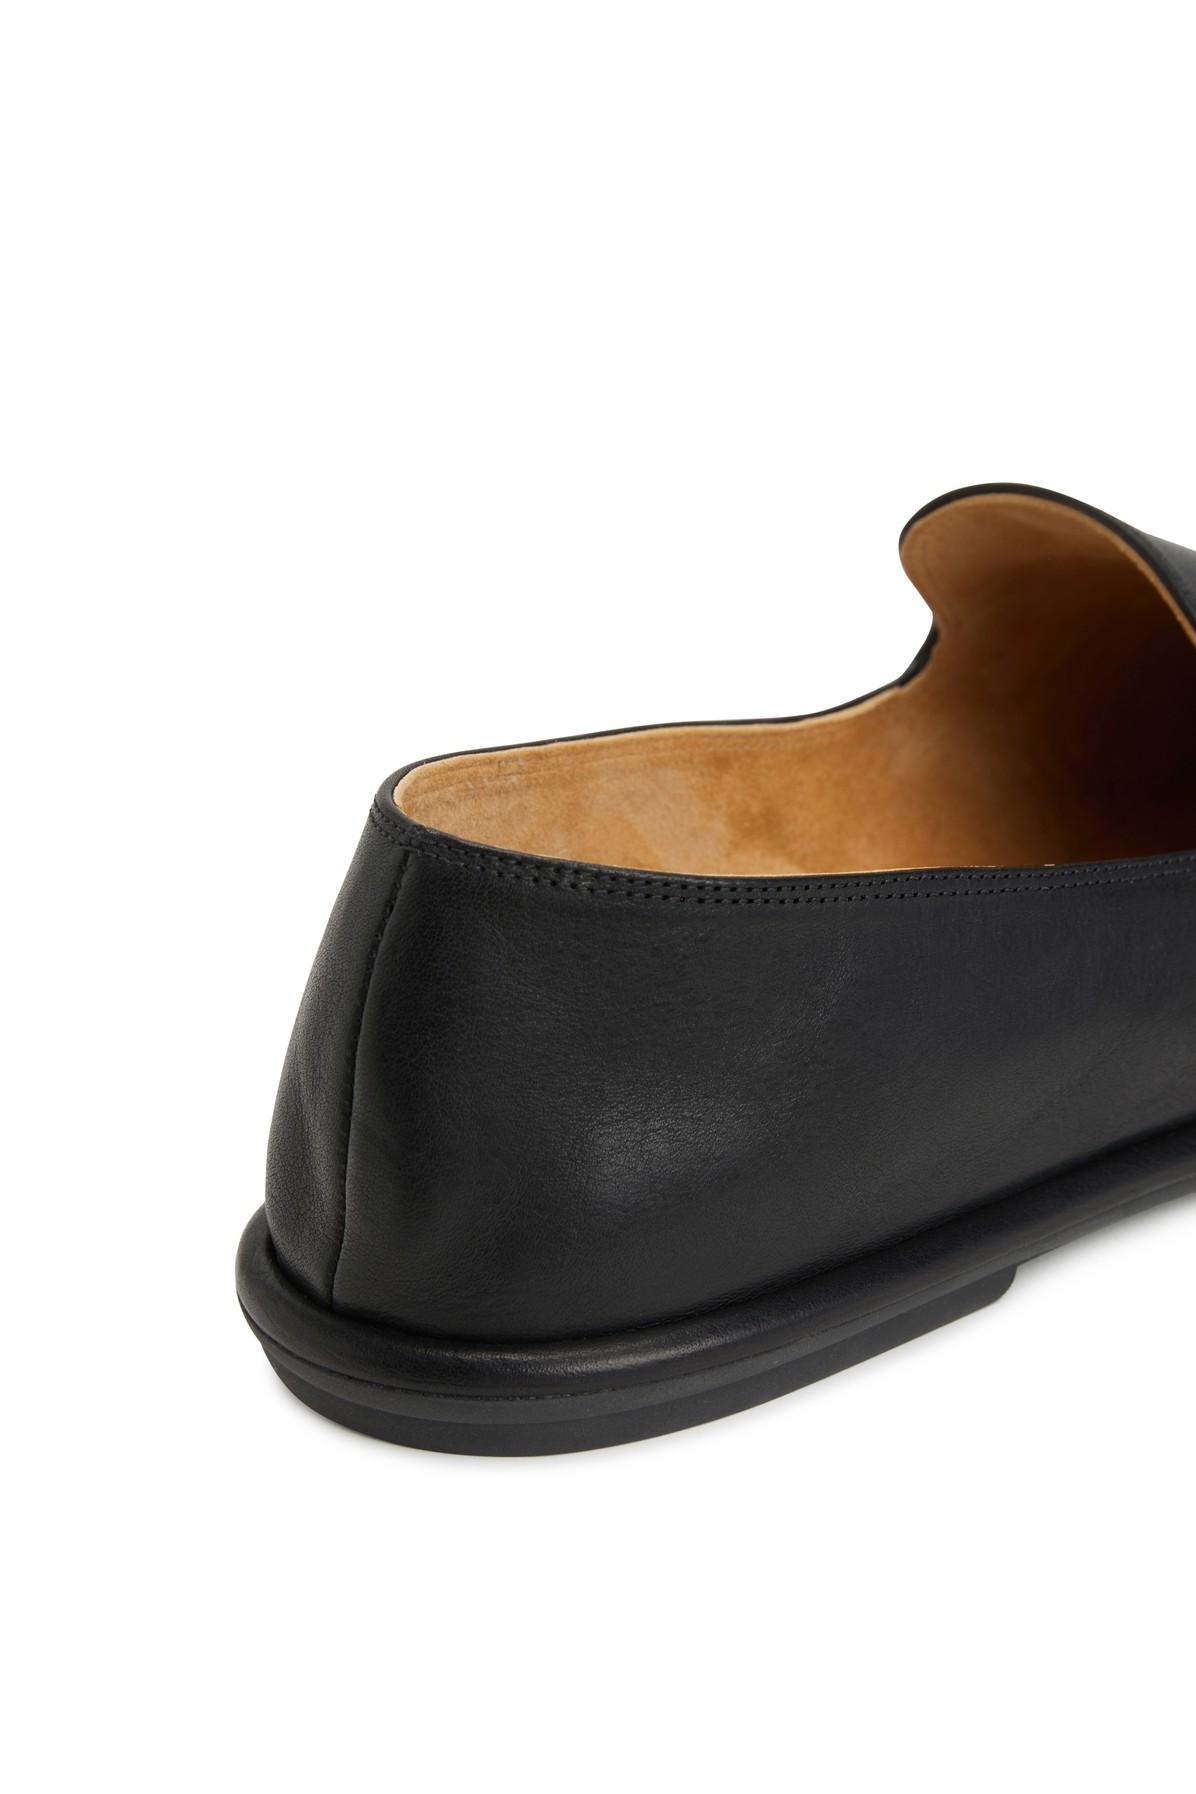 The Row Canal Leather Loafers in Black Womens Shoes Flats and flat shoes Loafers and moccasins 